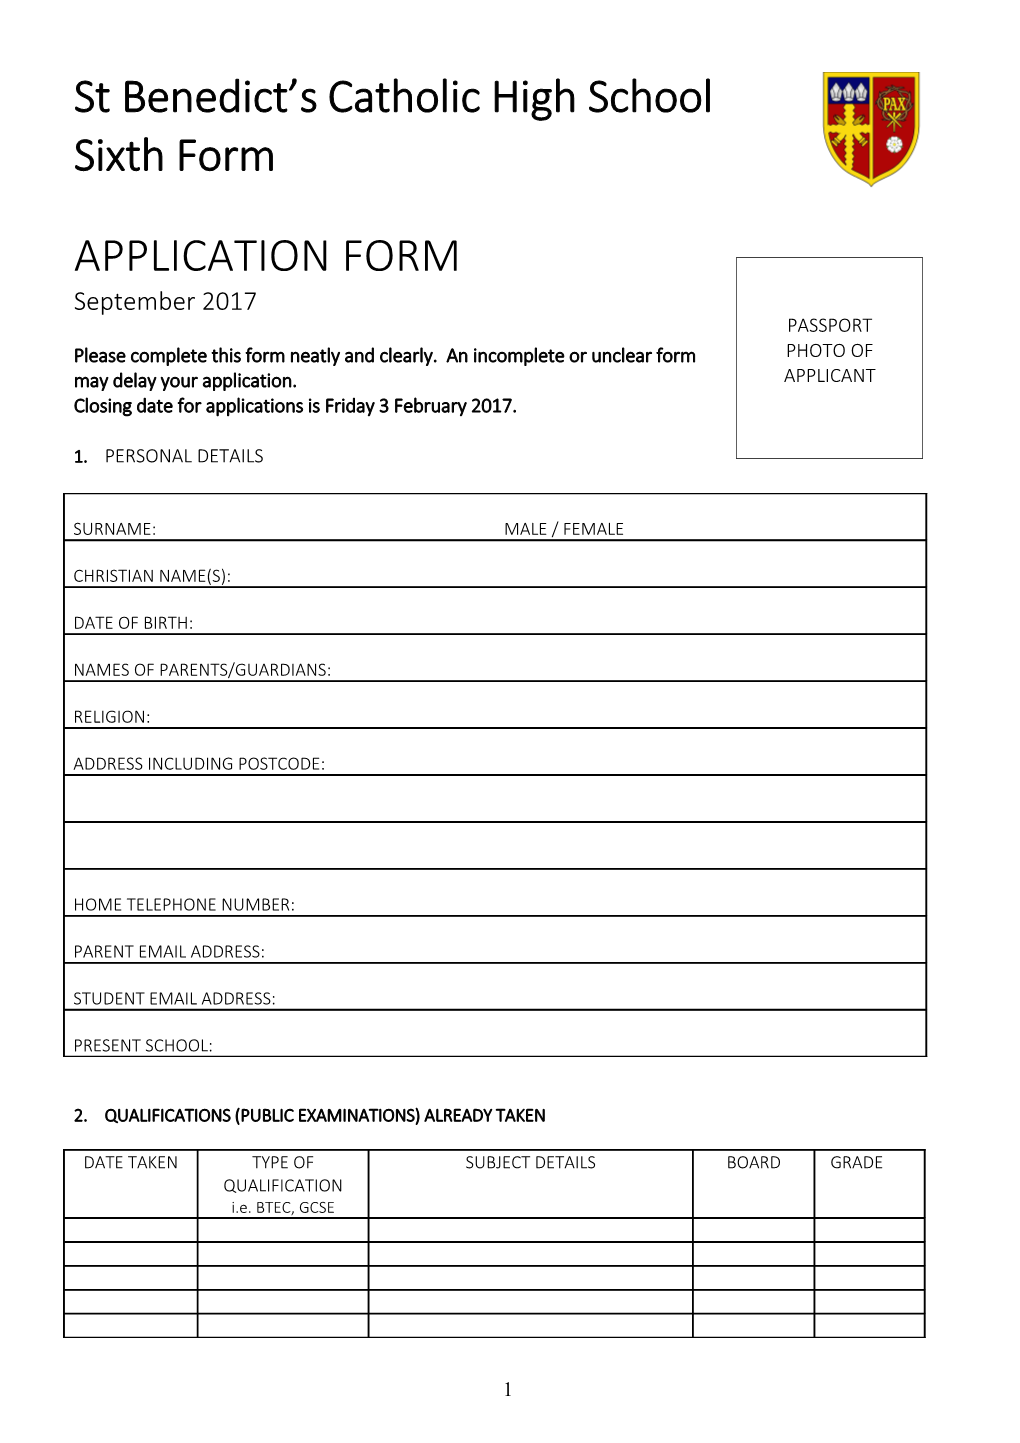 Please Complete This Form Neatly and Clearly. an Incompleteor Unclear Form